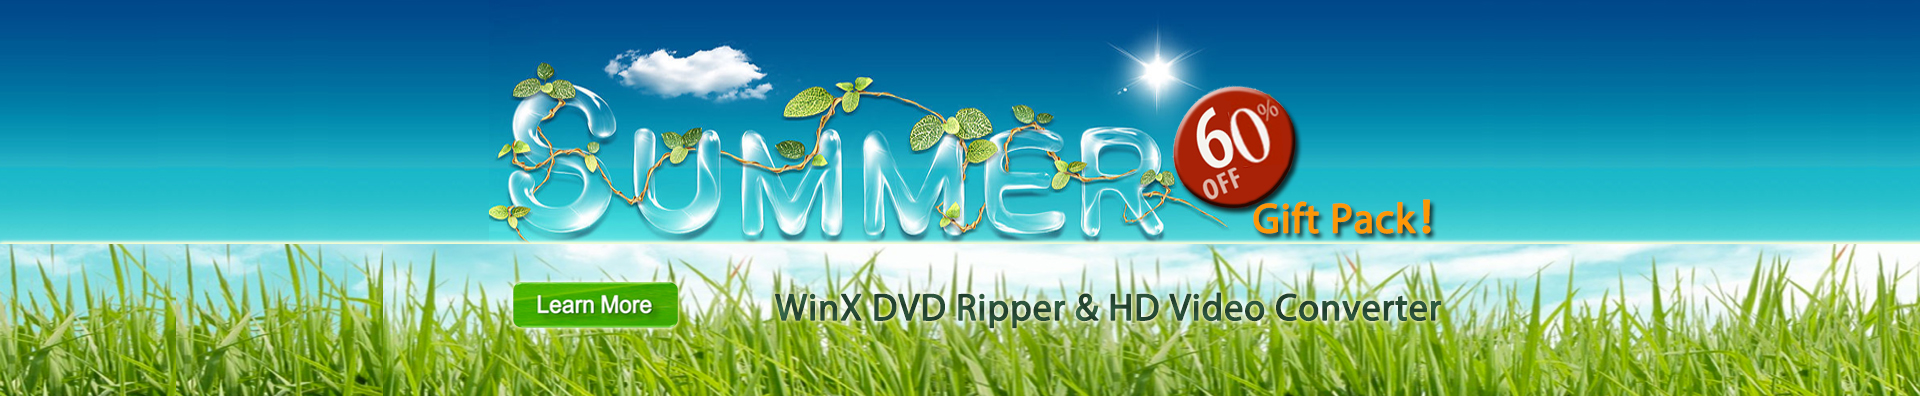 dvd ripper 60% off Package